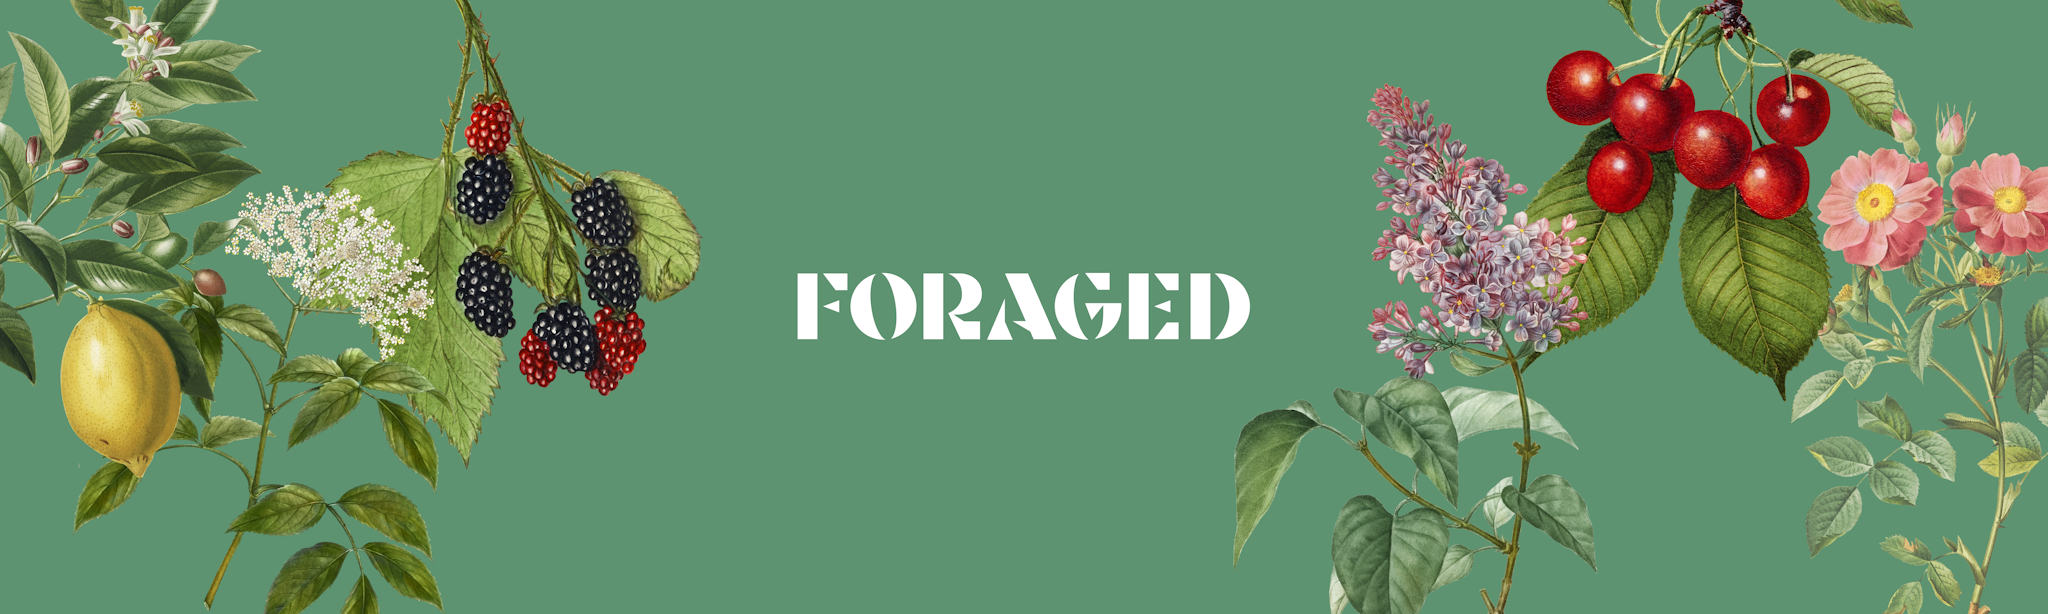 Forage Ahead's banner